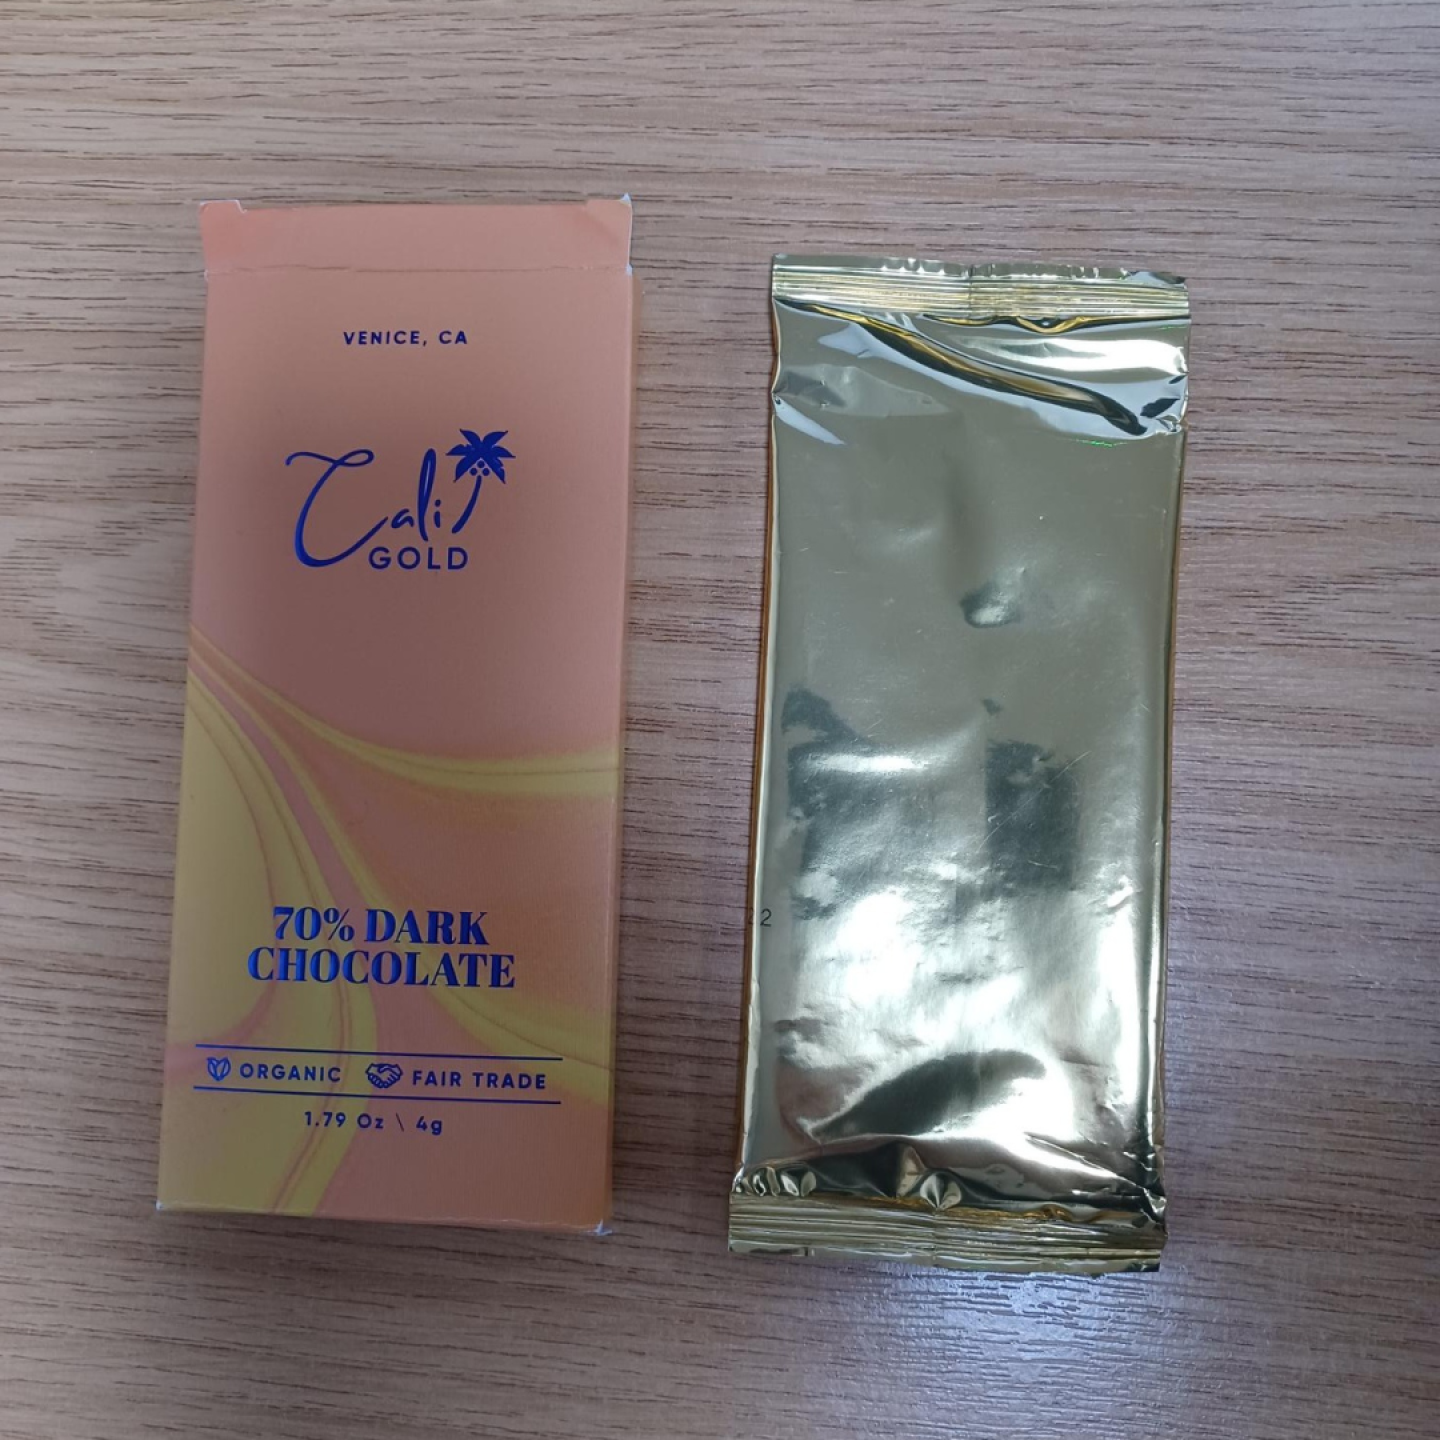 Example of Cali Gold chocolate bar that the FSA is strongly advising against eating